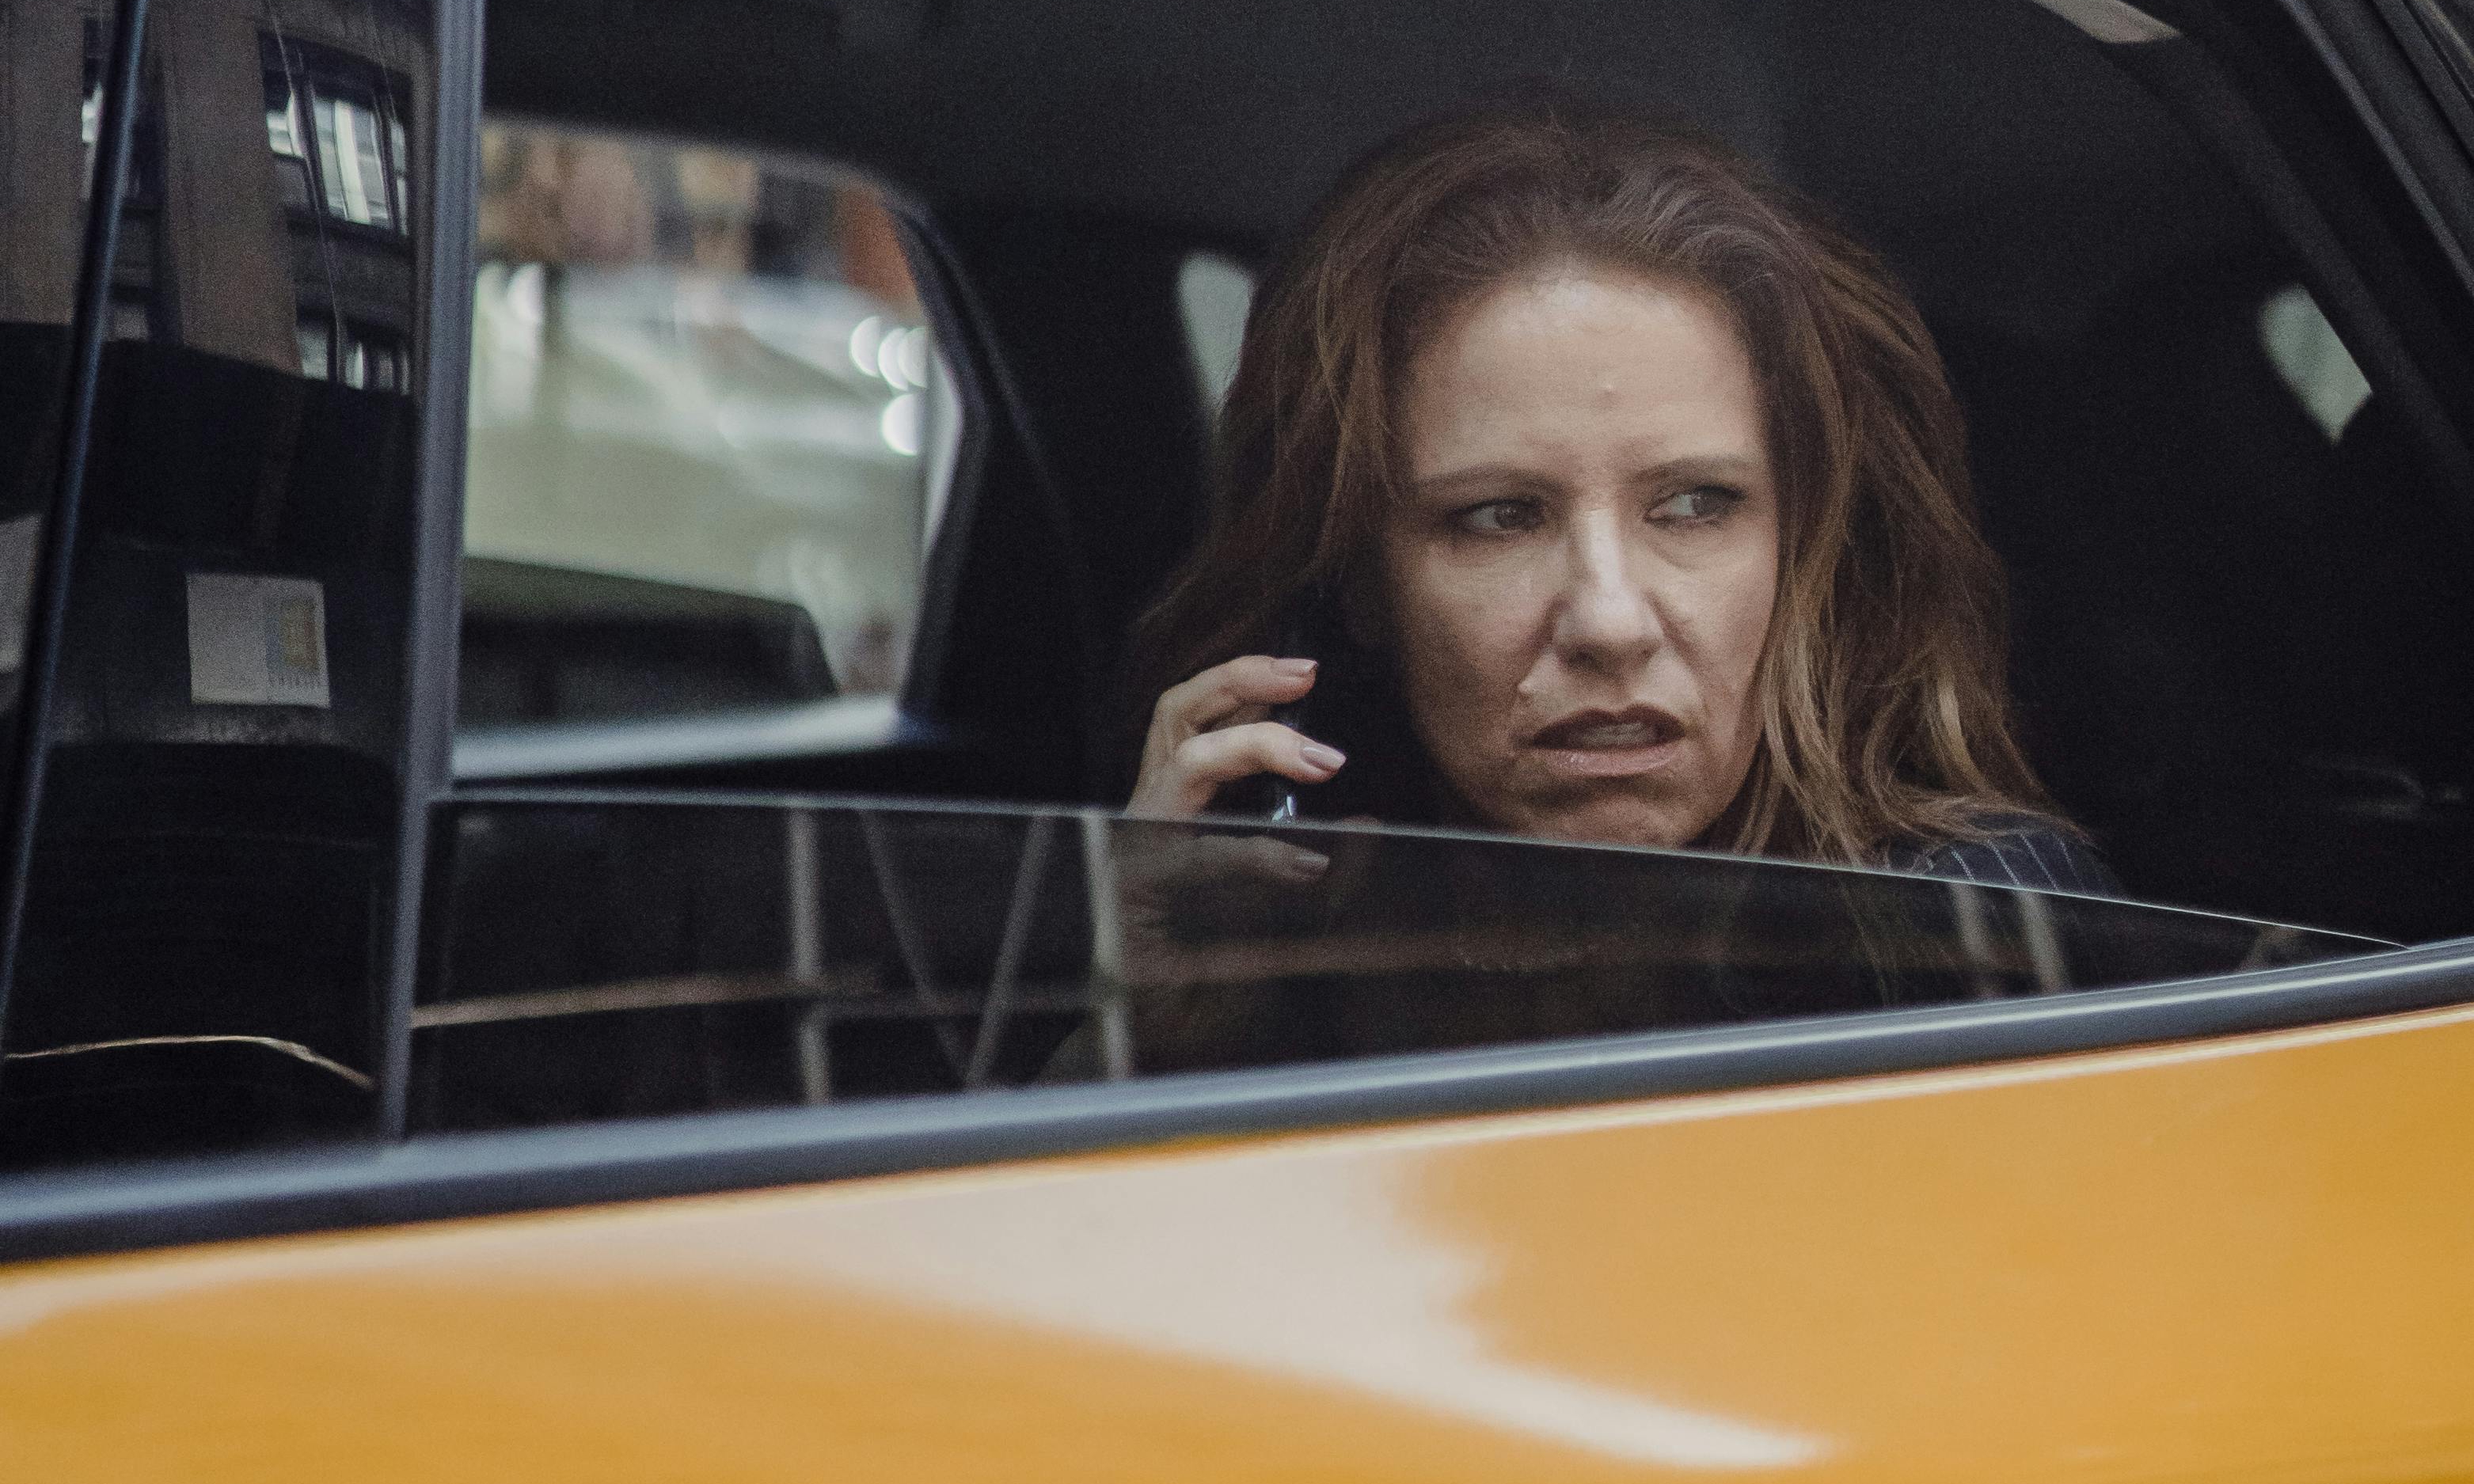 Olivia makes a phone call to her mother from the back of the taxi | Source: Pexels